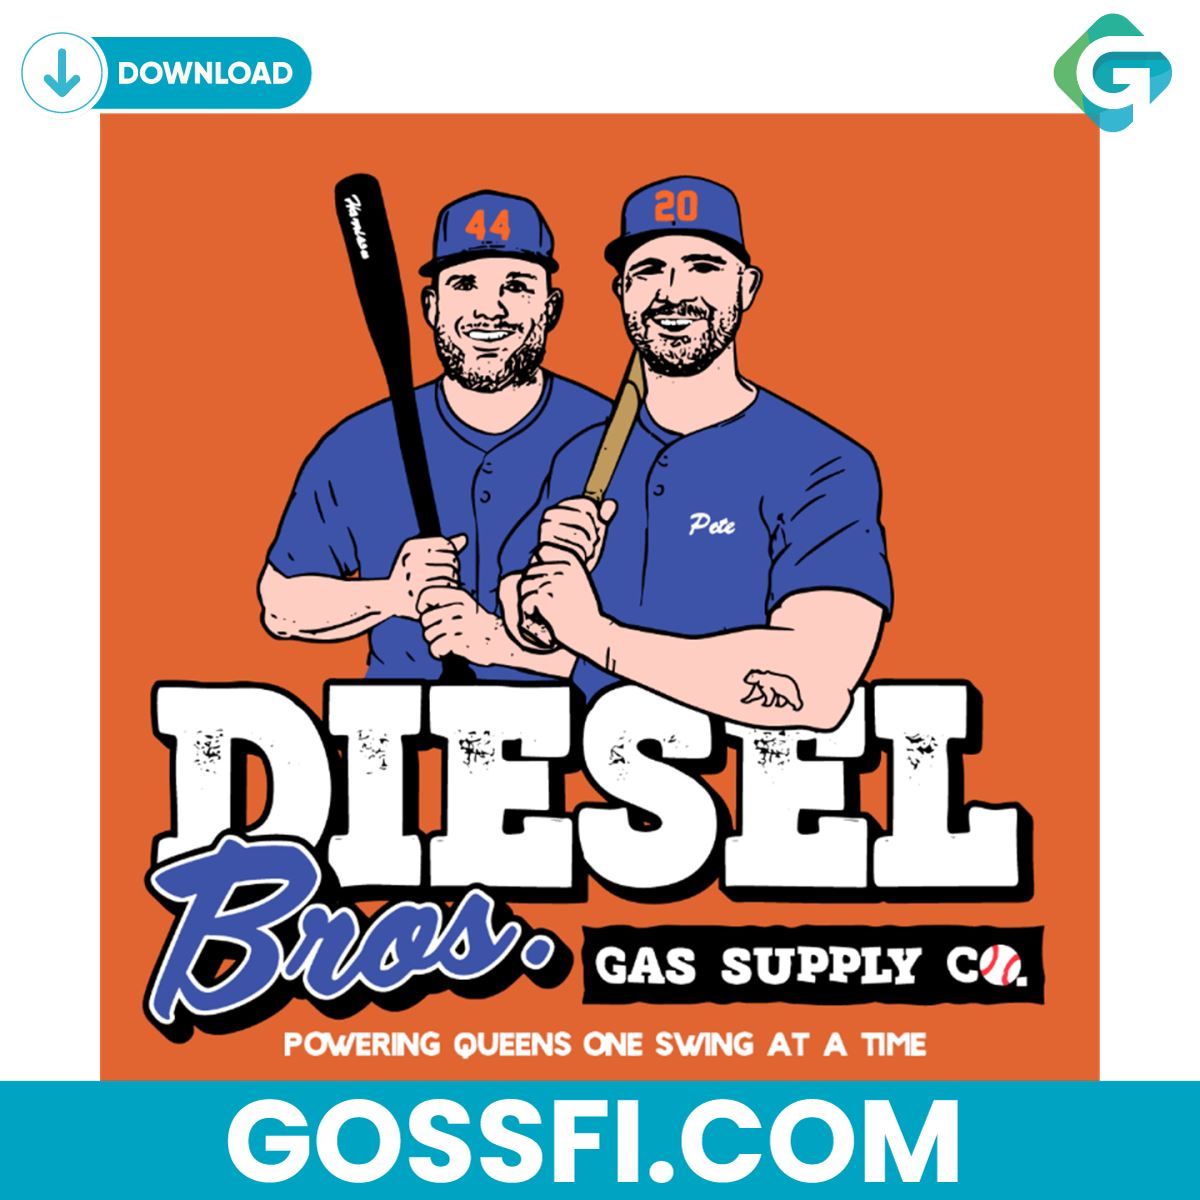 diesel-bros-gas-supply-co-harrison-bader-pete-alonso-new-york-mets-svg